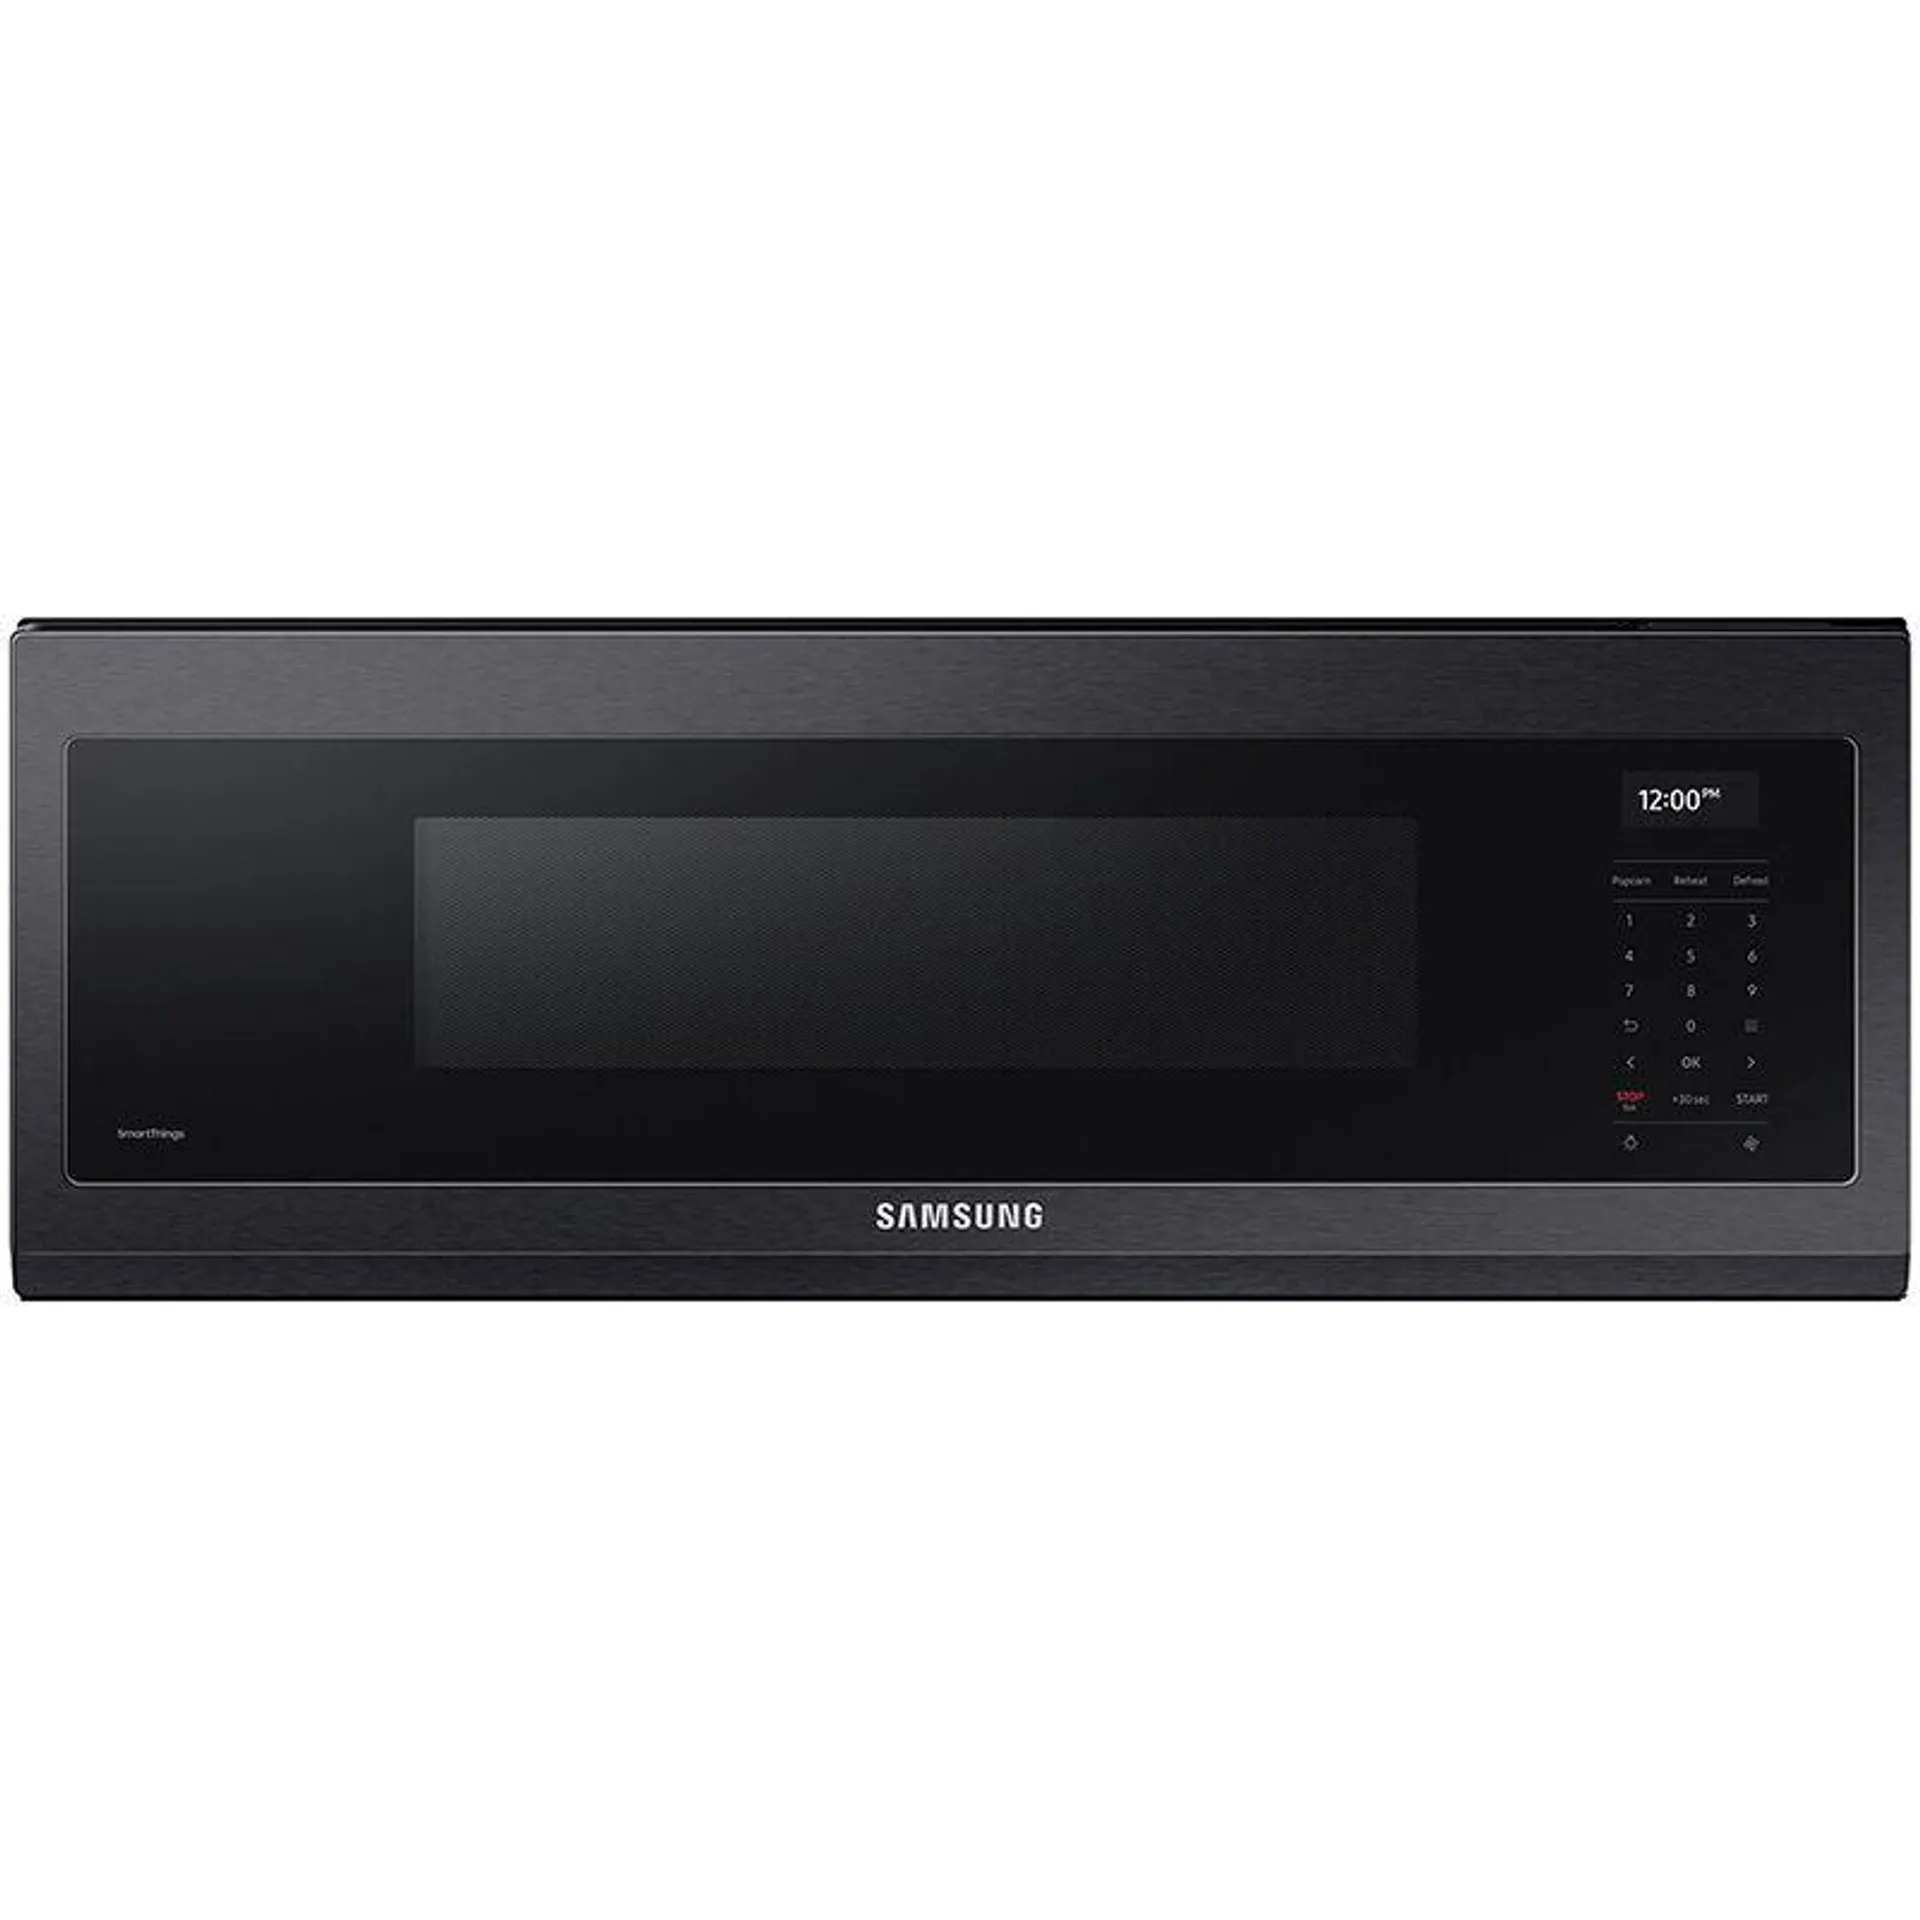 Samsung 30" 1.1 Cu. Ft. Over-the-Range Microwave with 10 Power Levels, 550 CFM & Sensor Cooking Controls - Black Stainless Steel